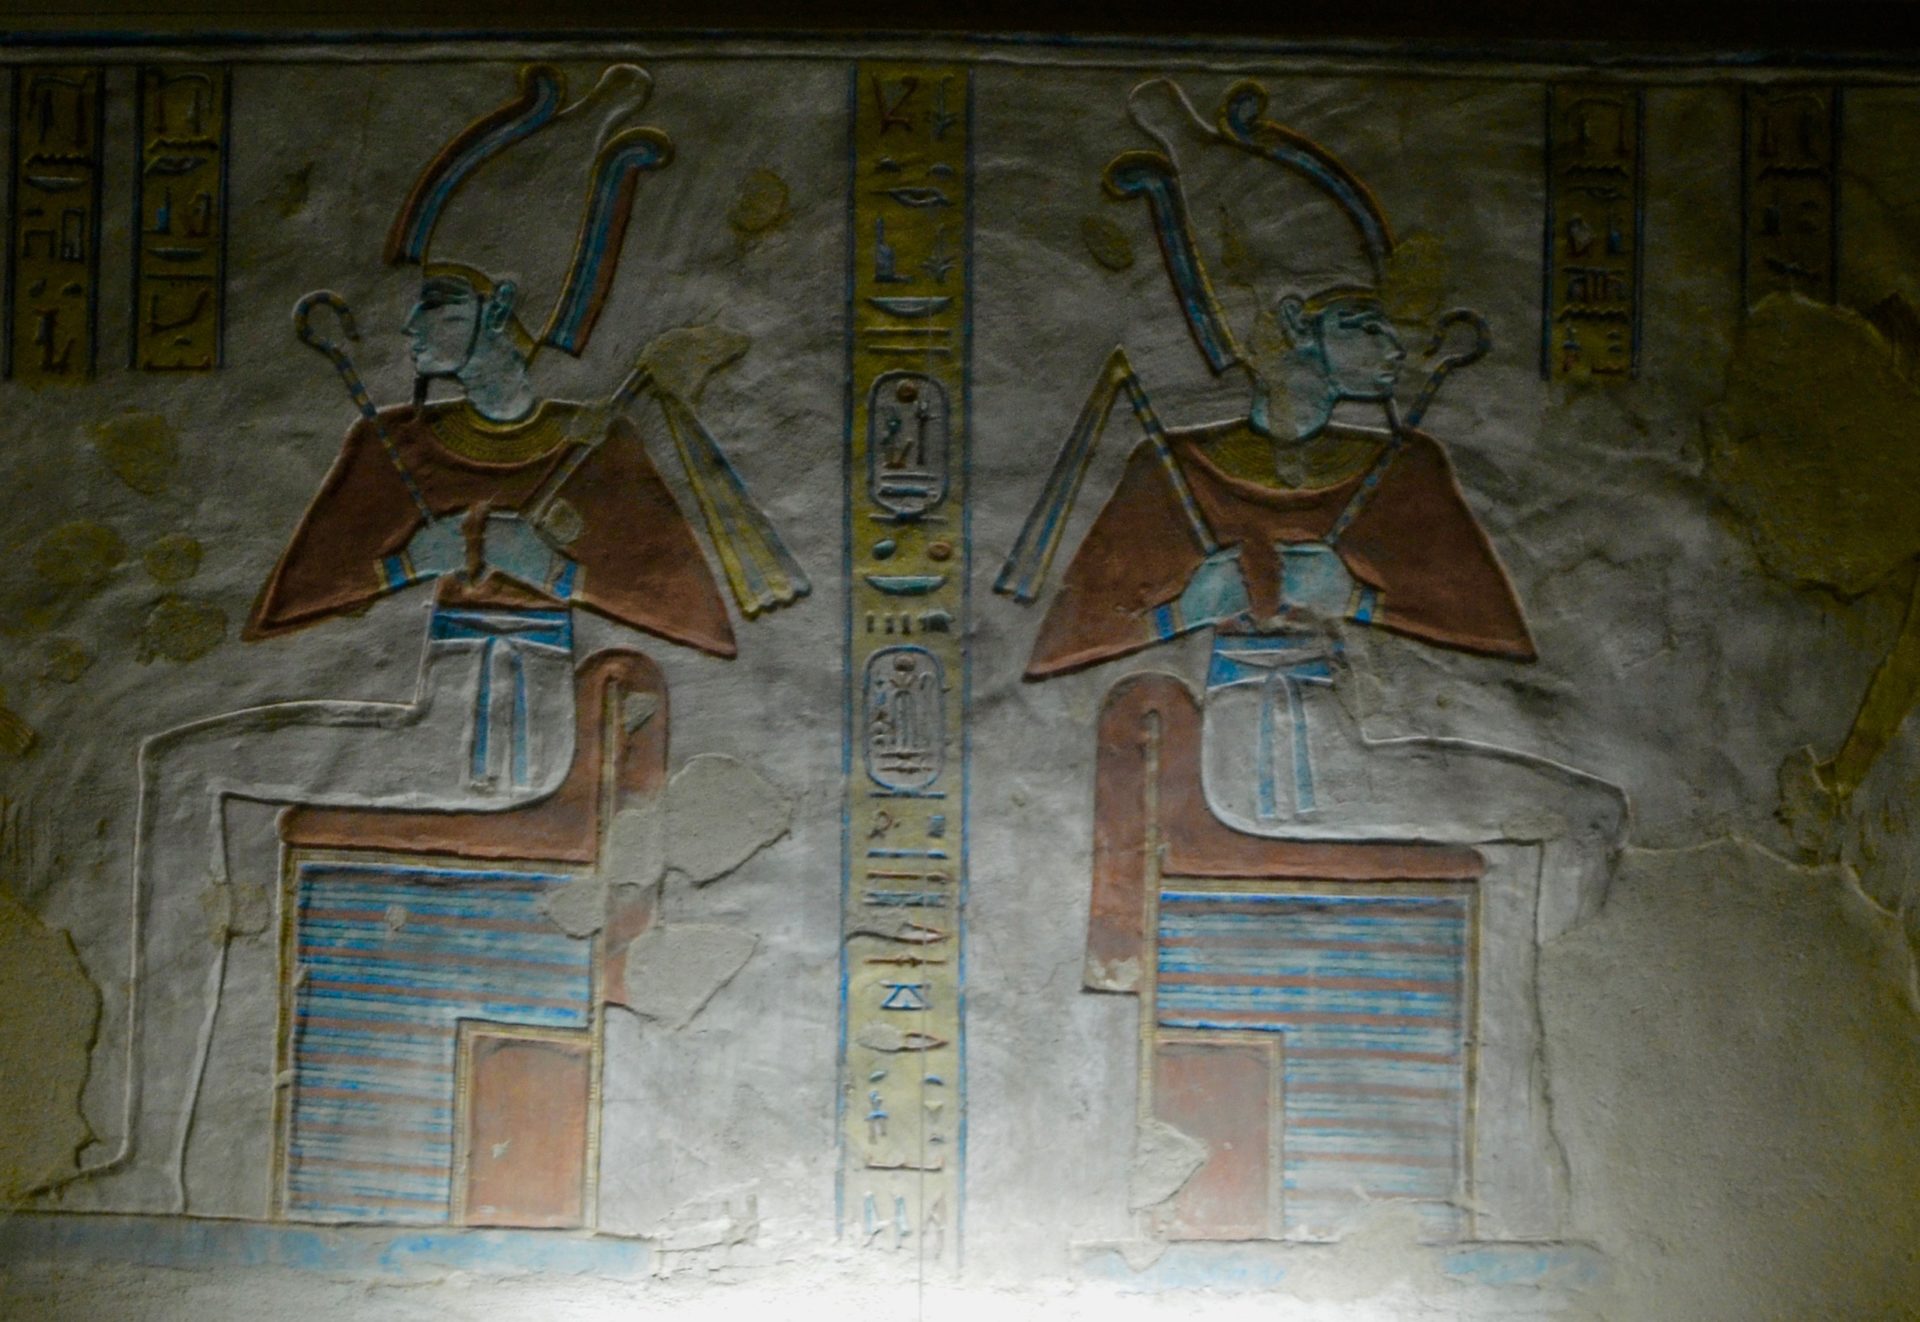 Two Amons in the Prince's Tomb